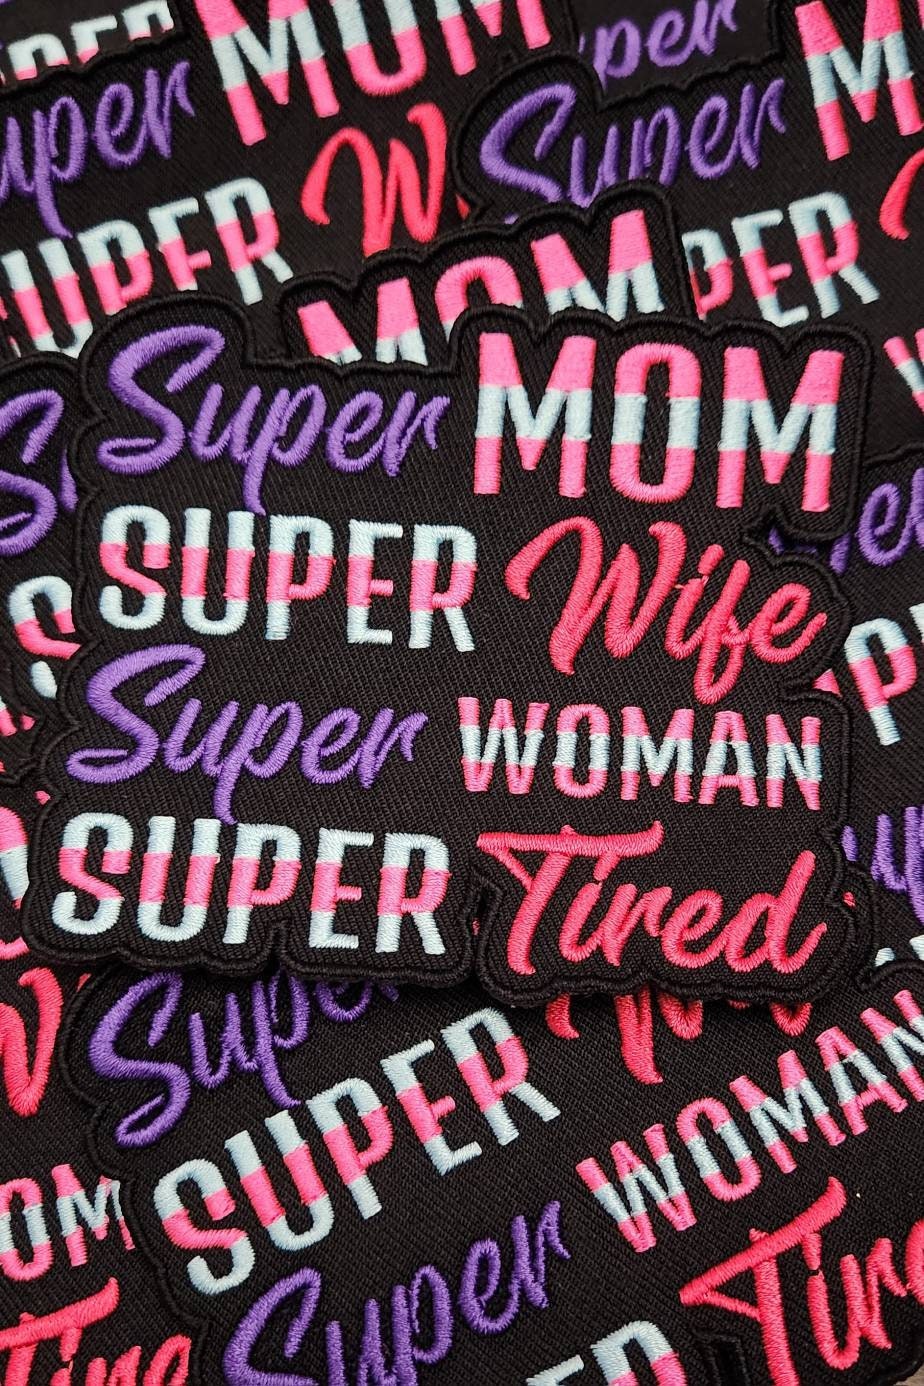 New, "Super Mom. Super Wife. Super Woman. Super Tired" Mom Patch, Size 4"x4" Iron-on Embroidered Patch, Patches for Jackets, Gift for Mom